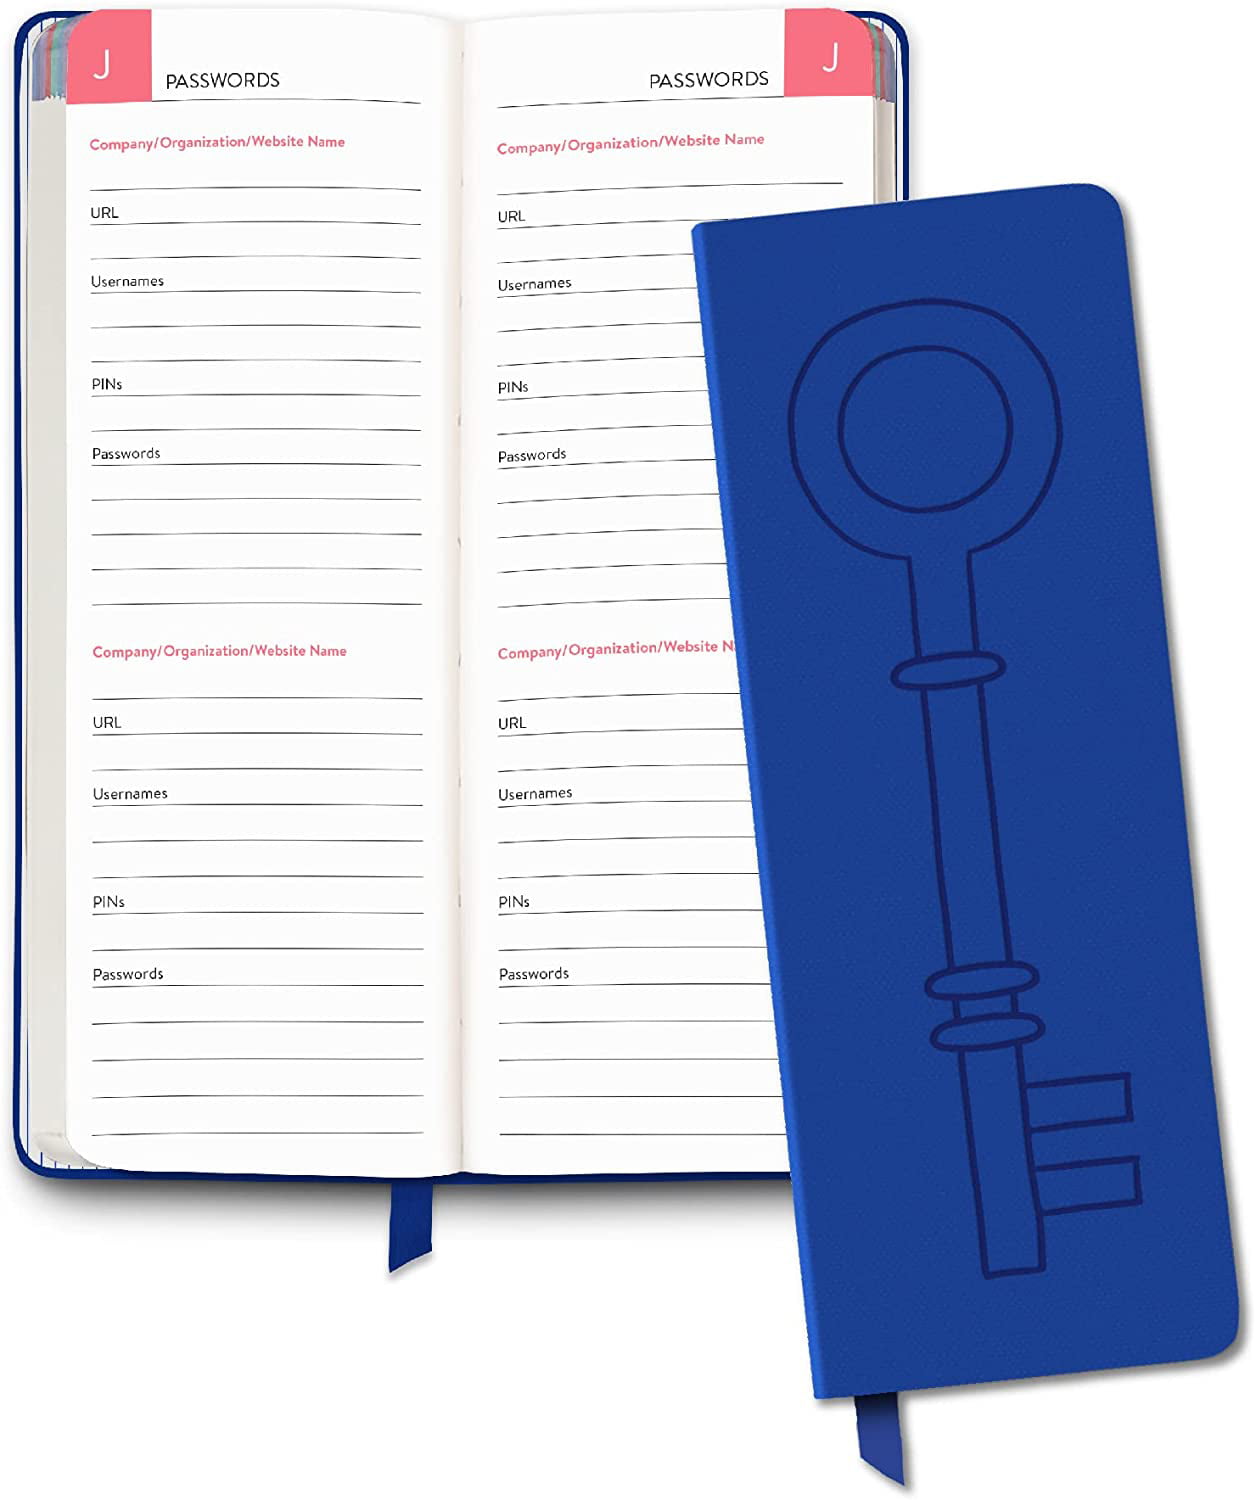 in Cobalt Internet Password Leatheresque Jotter Journal by Studio Oh 2.63 x 7.25 Portable Journal Book with Soft Leather-Like Cover and 160 Pages for Recording of Usernames PINs & Passwords 